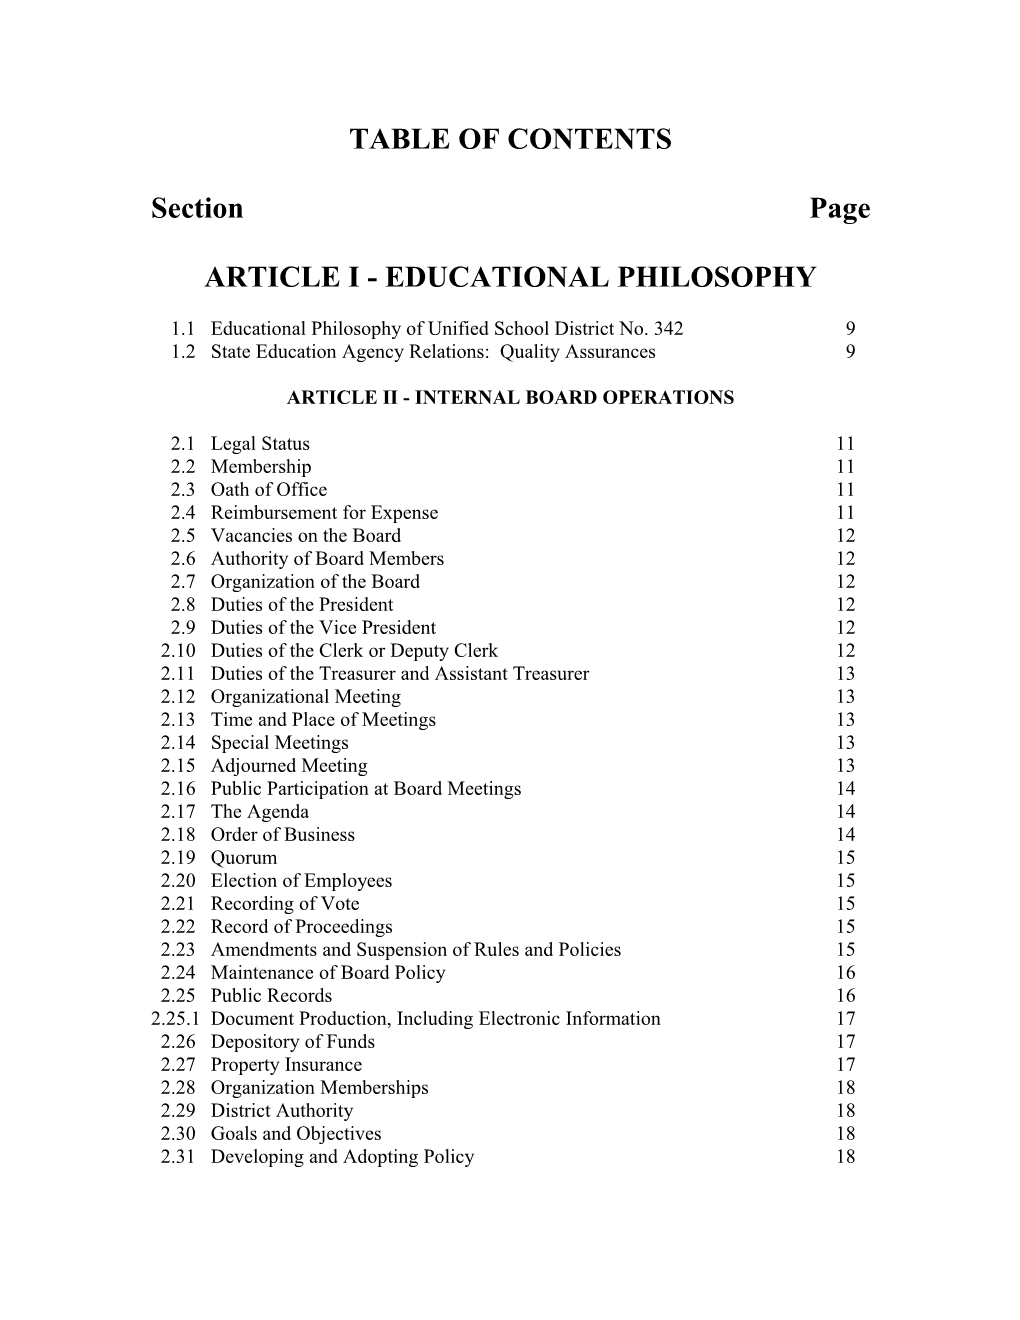 Table of Contents s225